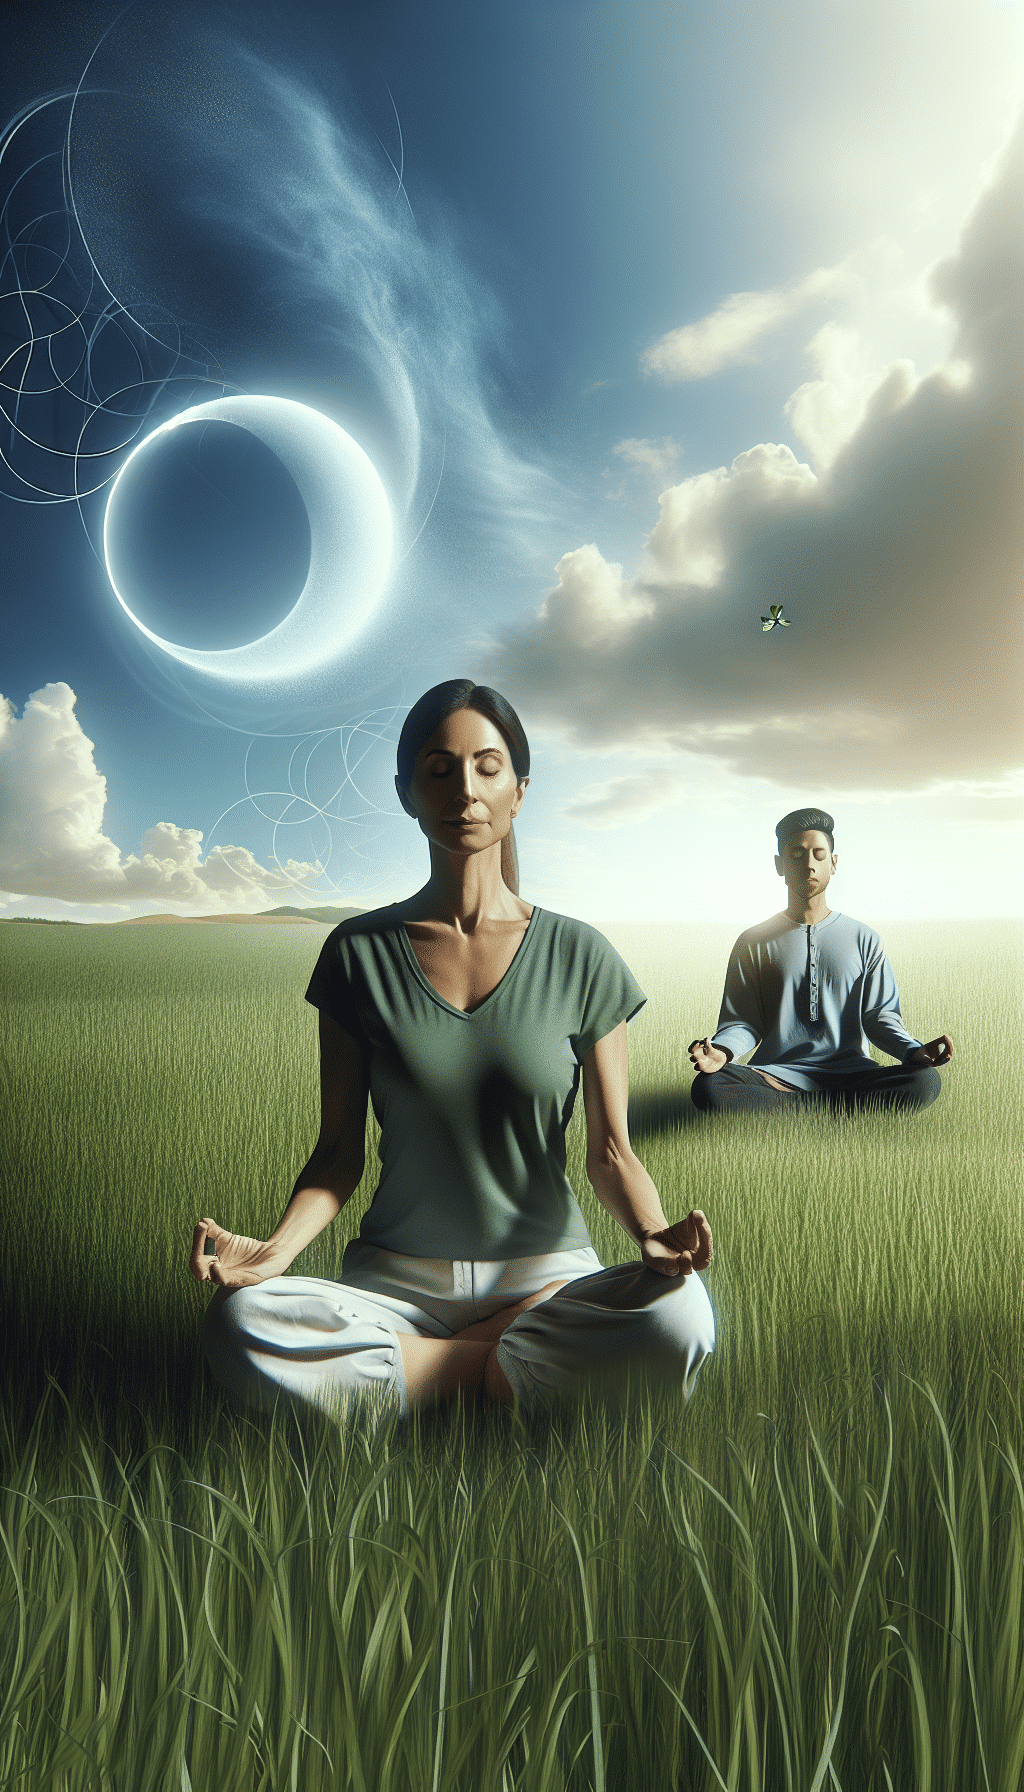 Complete Meditation: A Holistic Approach